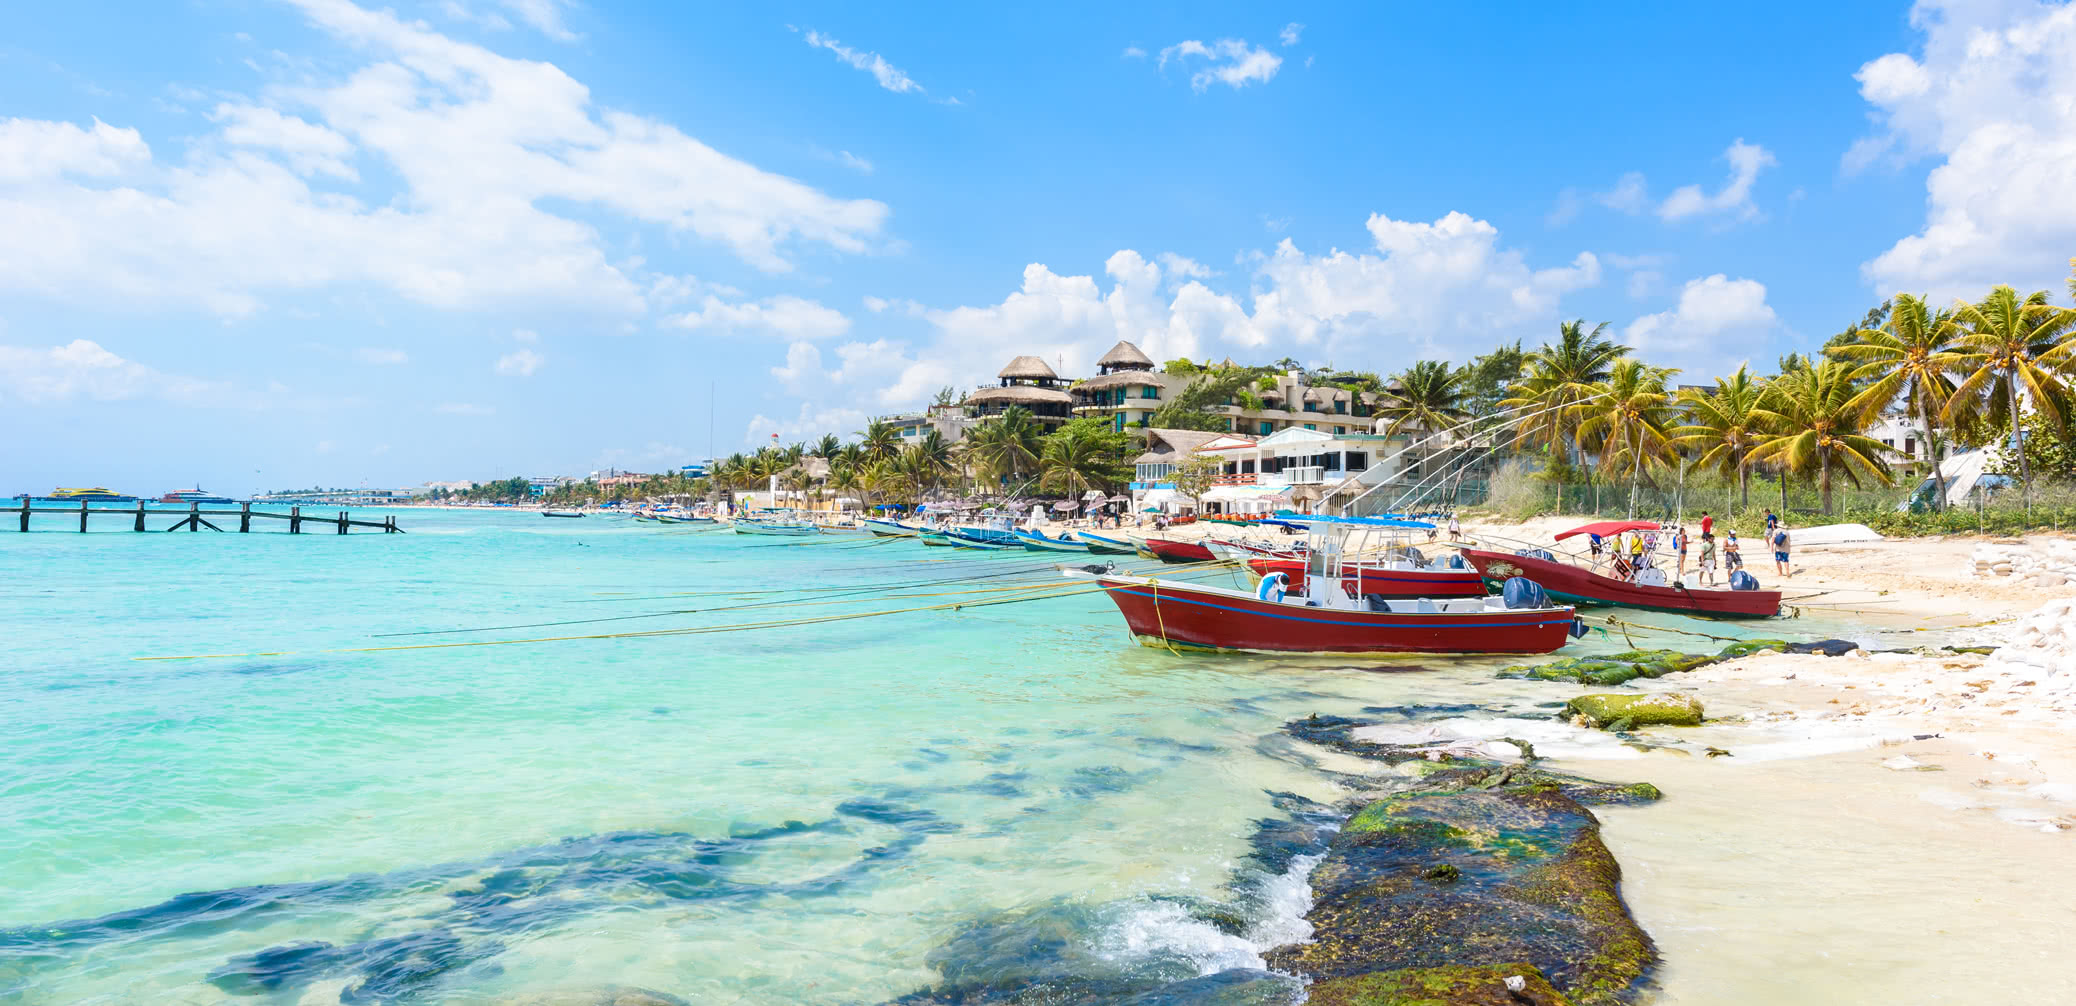 Is There A Four Seasons In Riviera Maya, Cancun Or Playa Del Carmen?